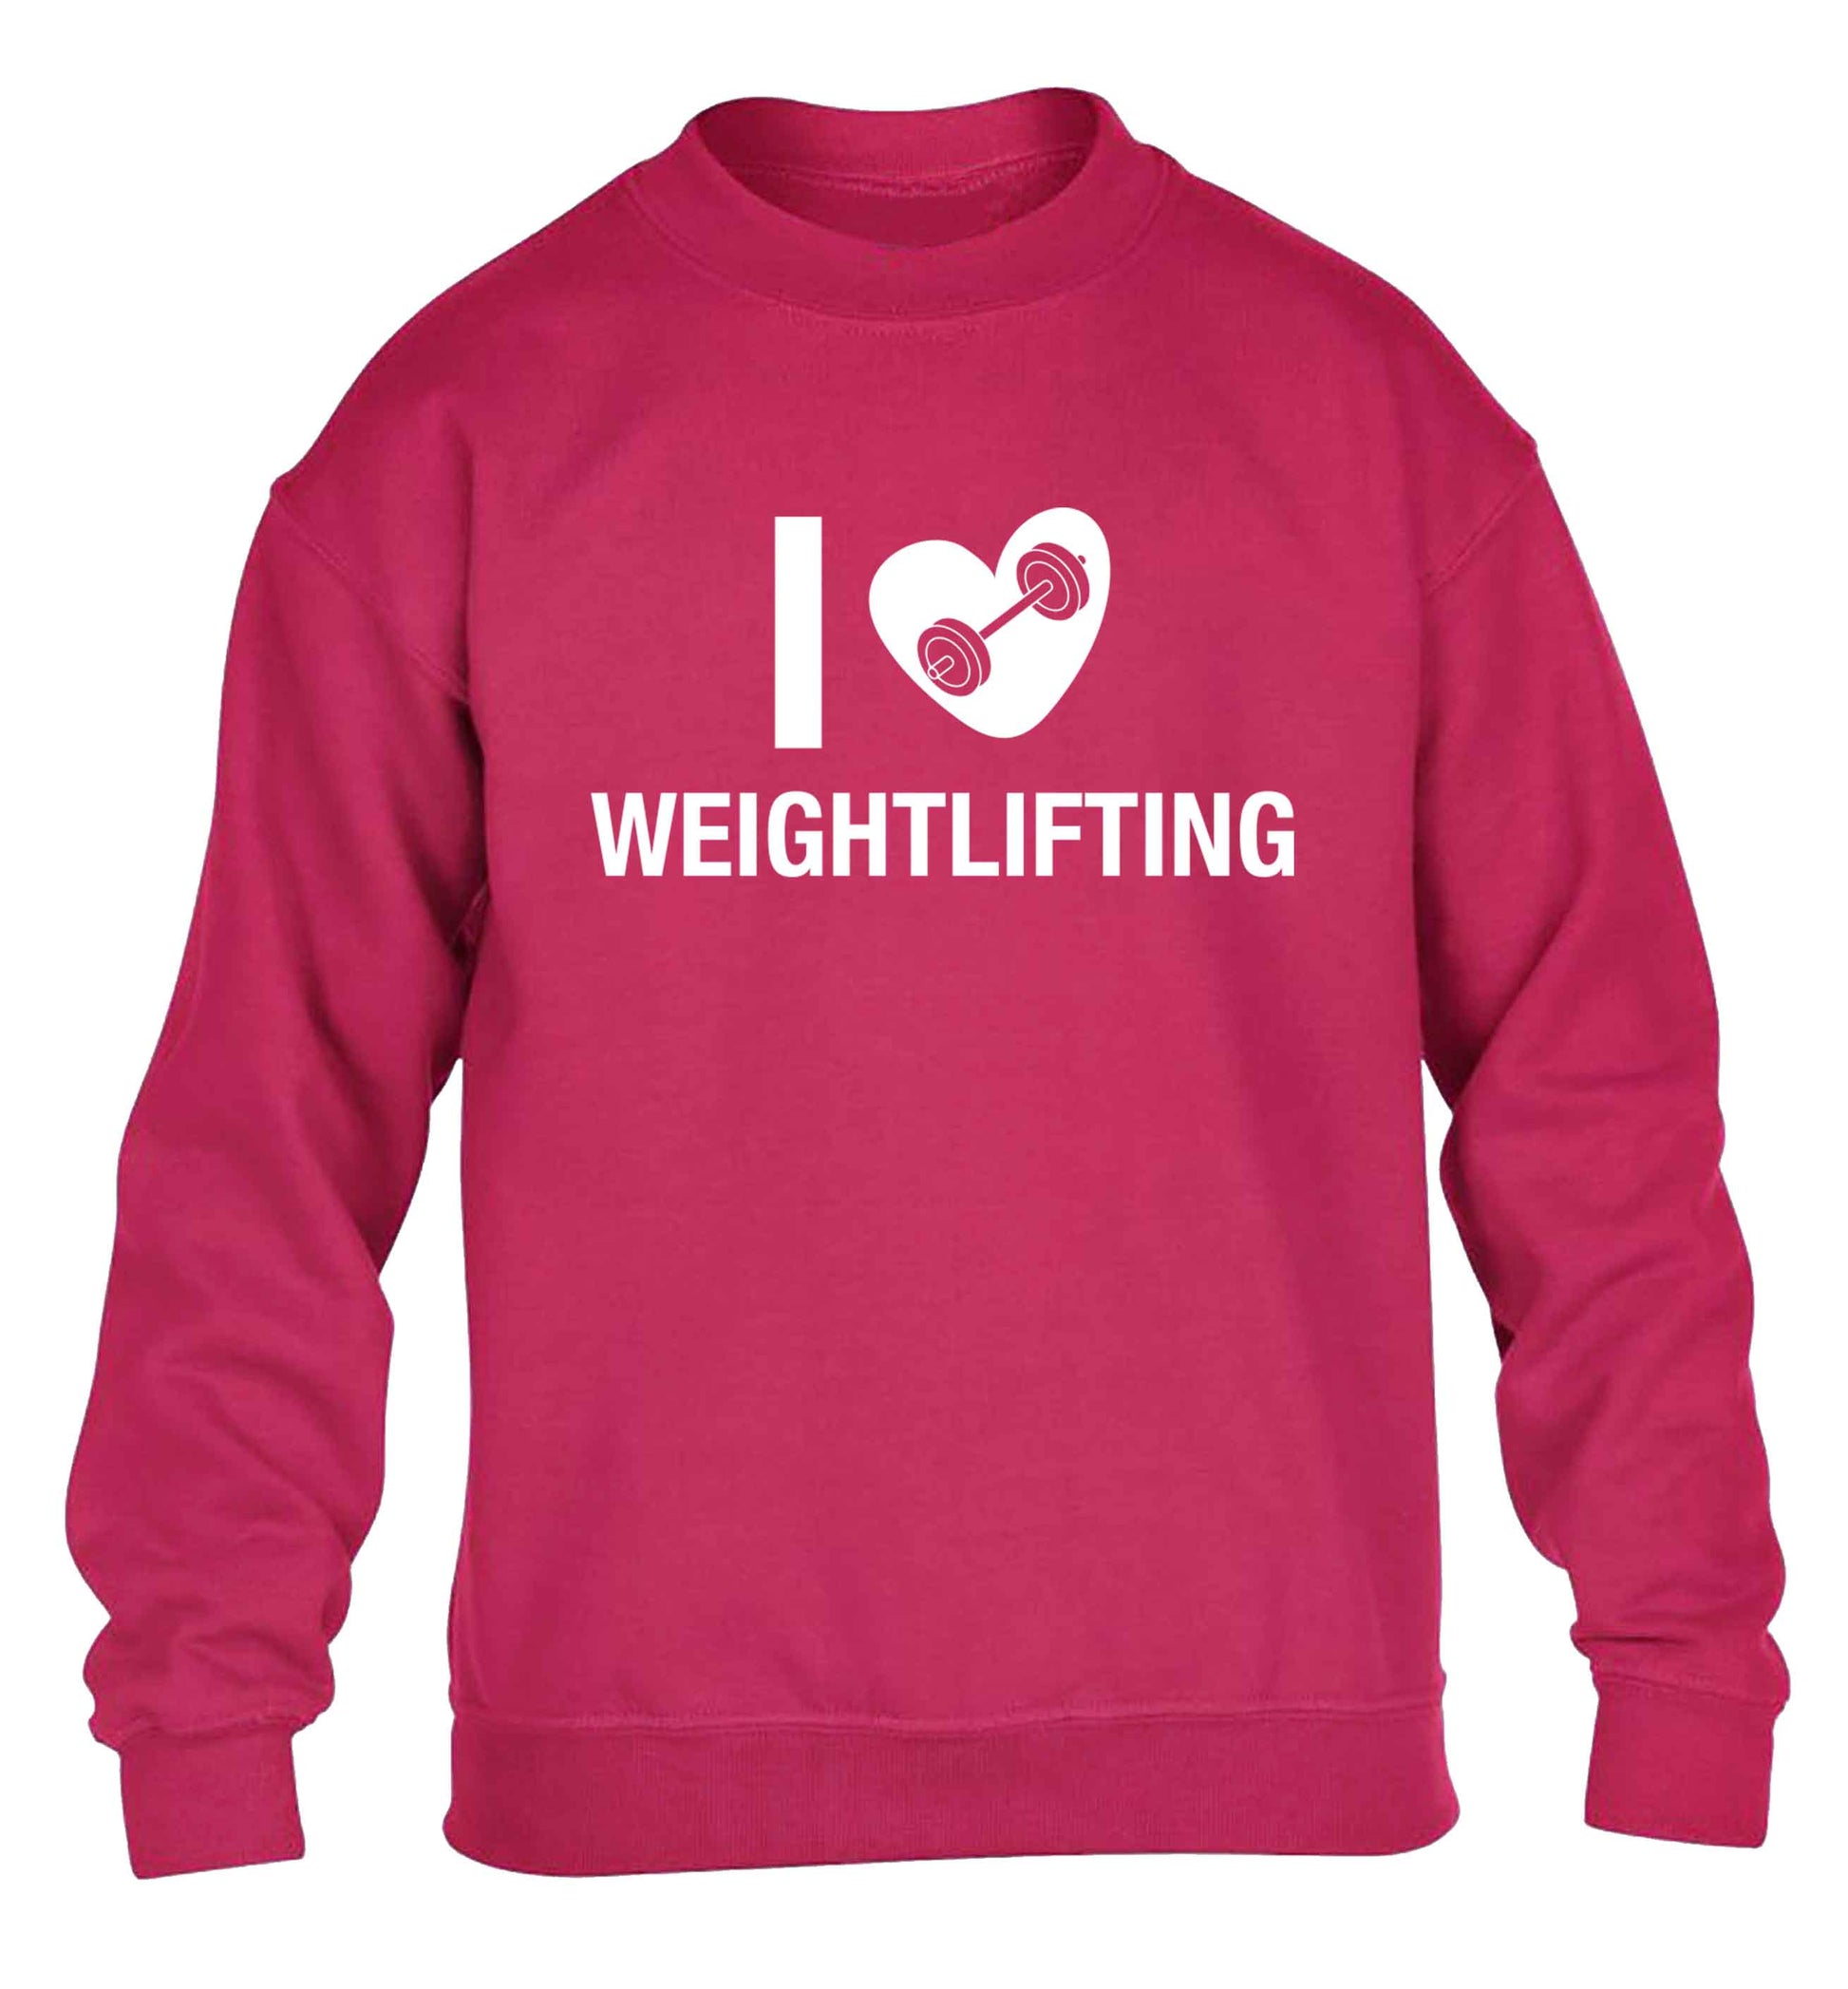 I love weightlifting children's pink sweater 12-13 Years